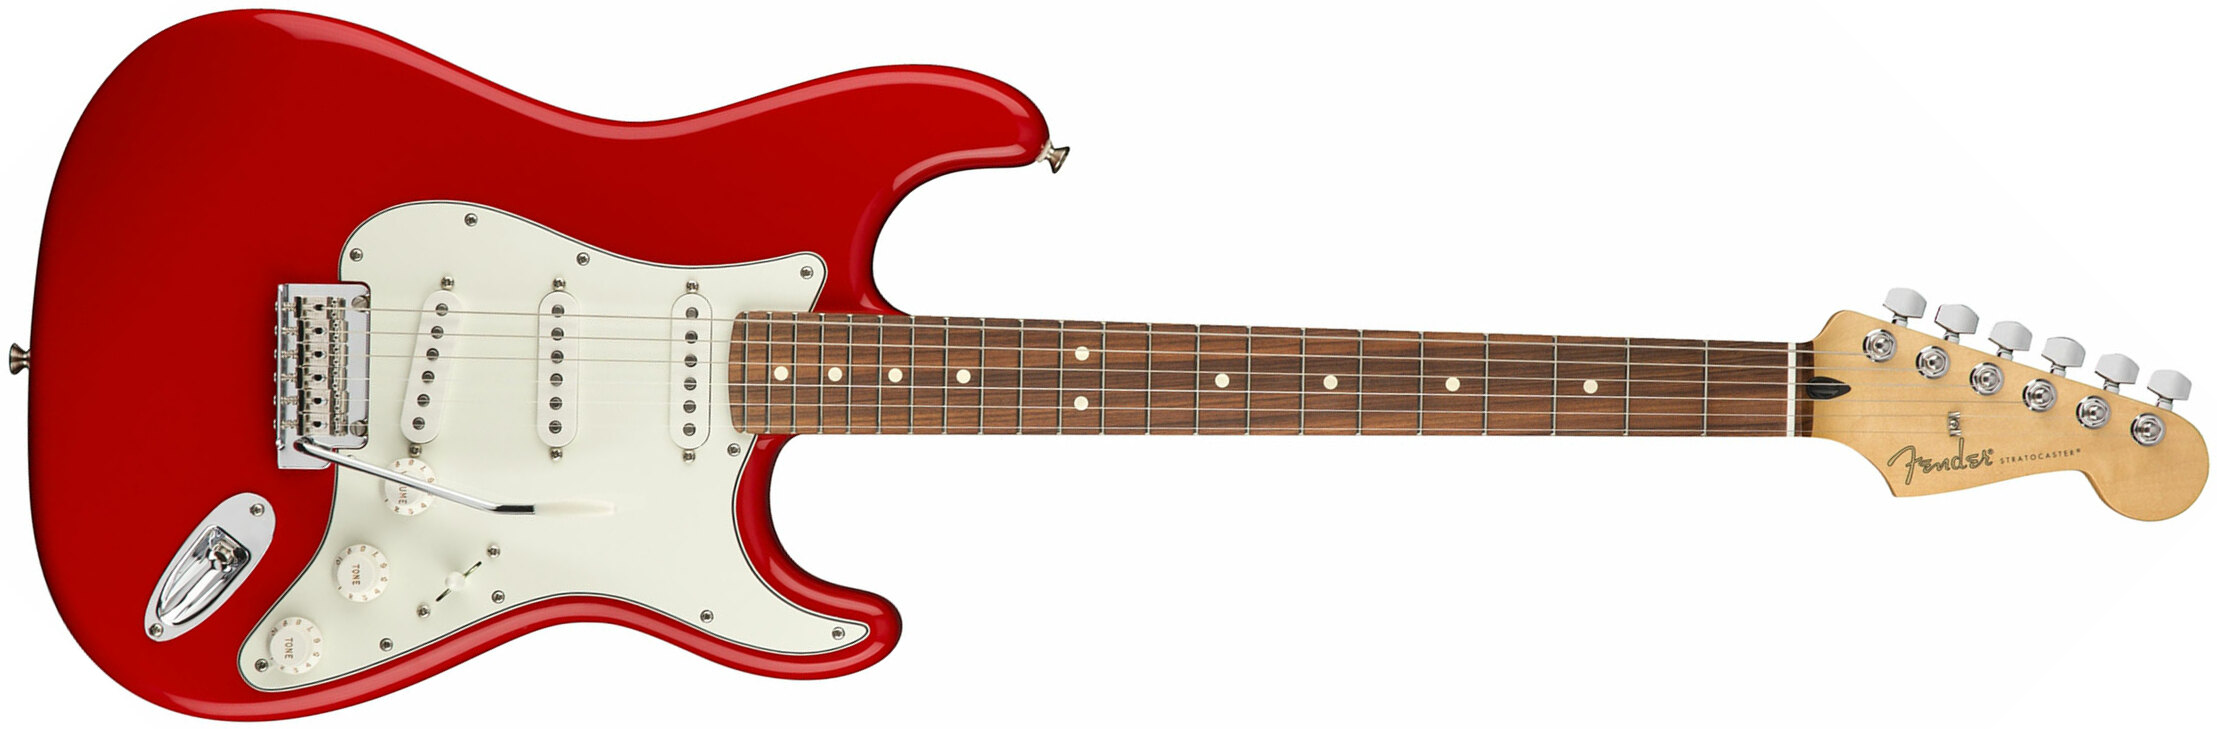 Fender Strat Player Mex Sss Pf - Sonic Red - Str shape electric guitar - Main picture